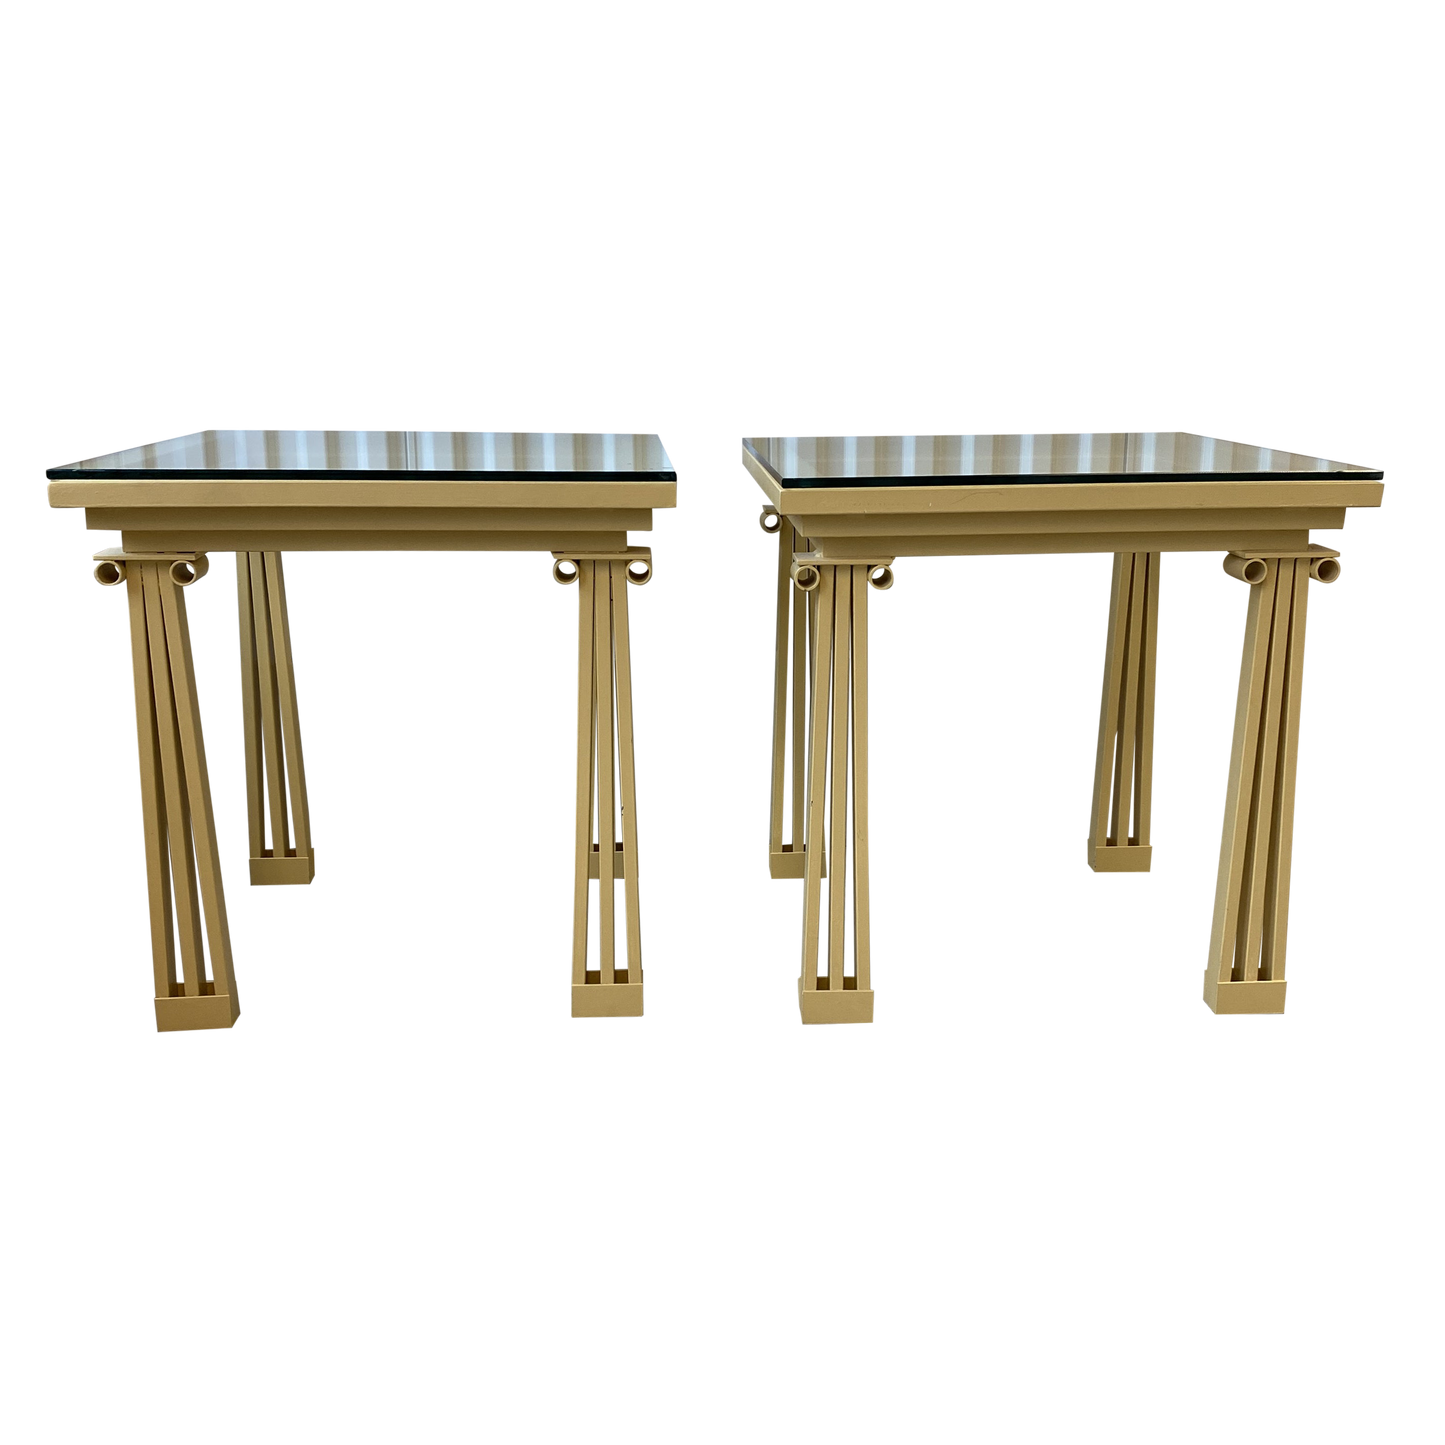 Alfrank Designs Postmodern Ionic Column Lacquered Wrought Iron Side Tables With Glass Tops - a Pair